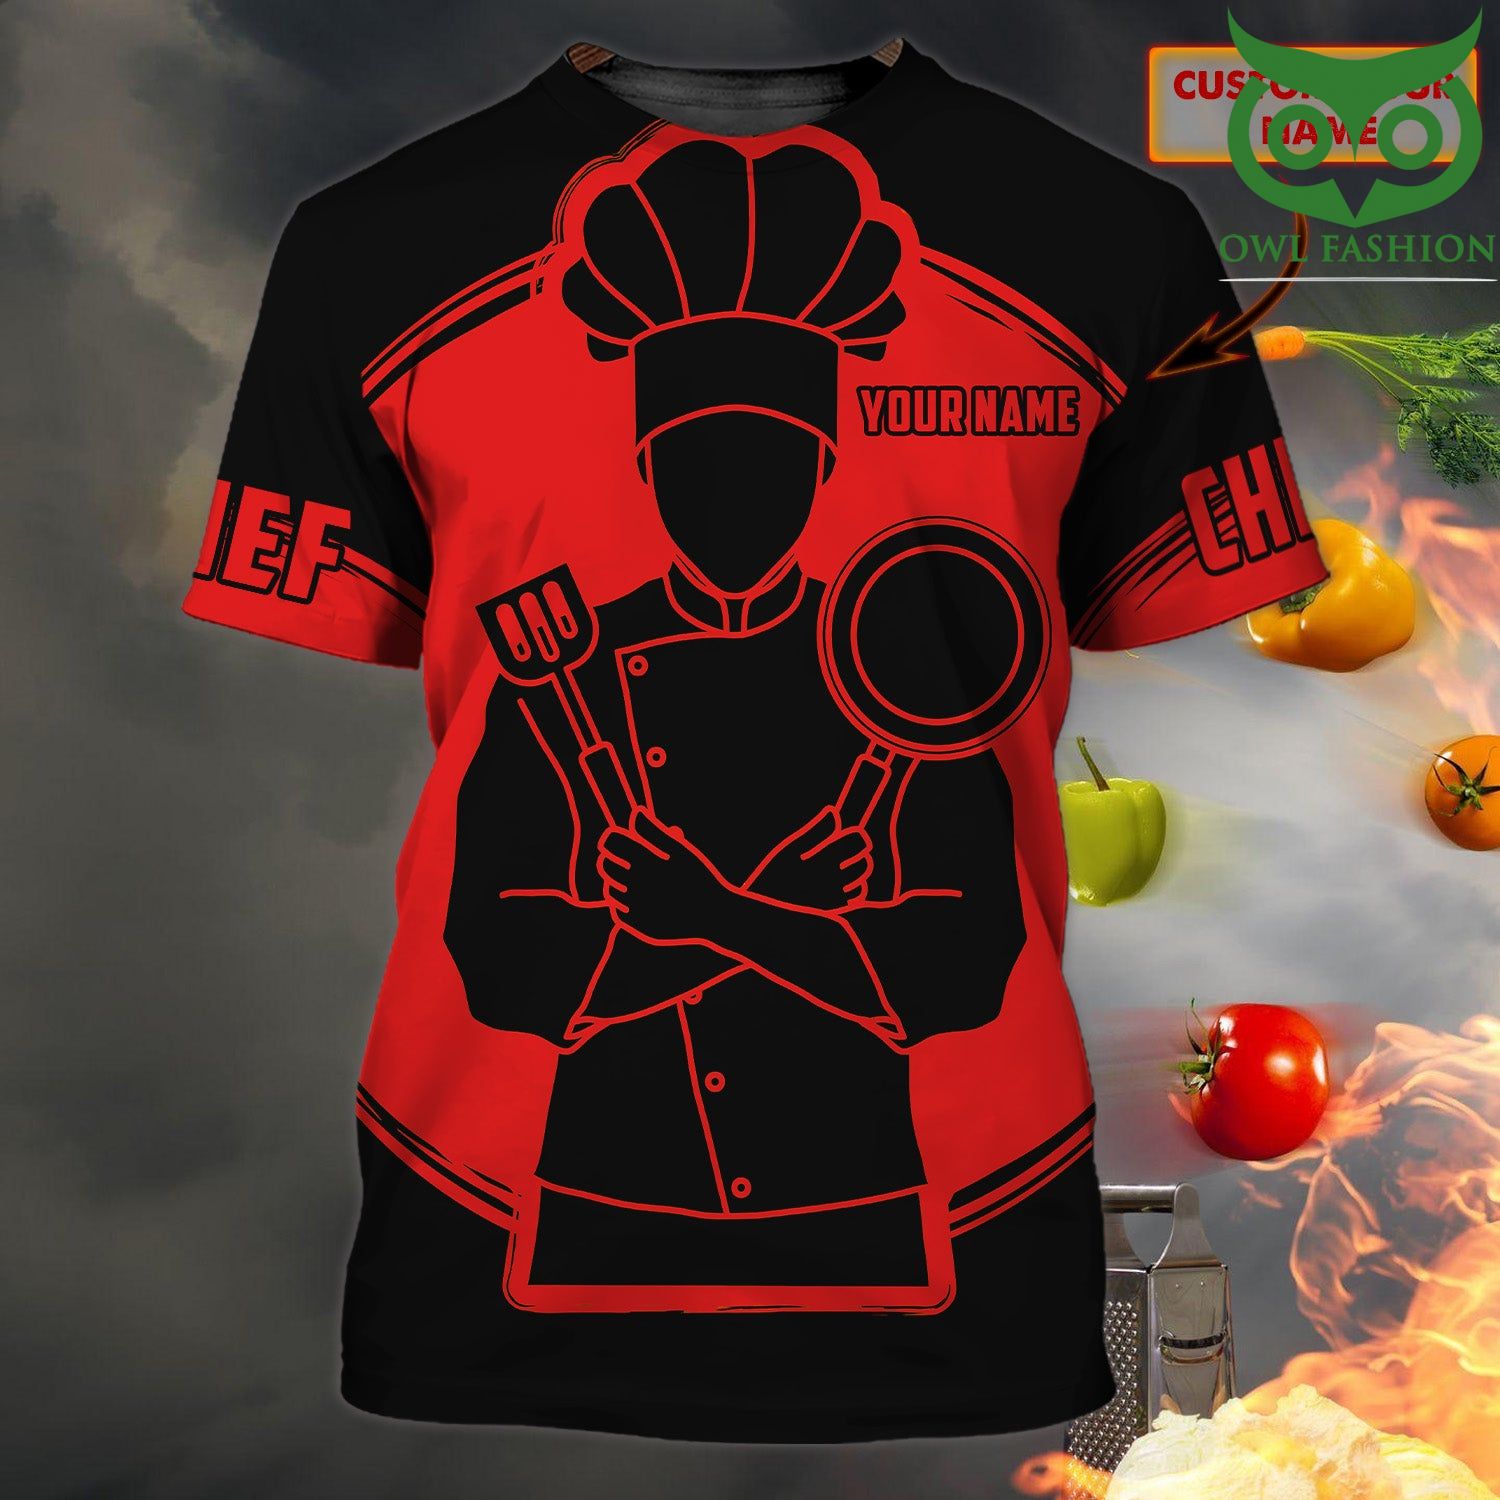 CHEF red and black shape Personalized Name 3D Tshirt 